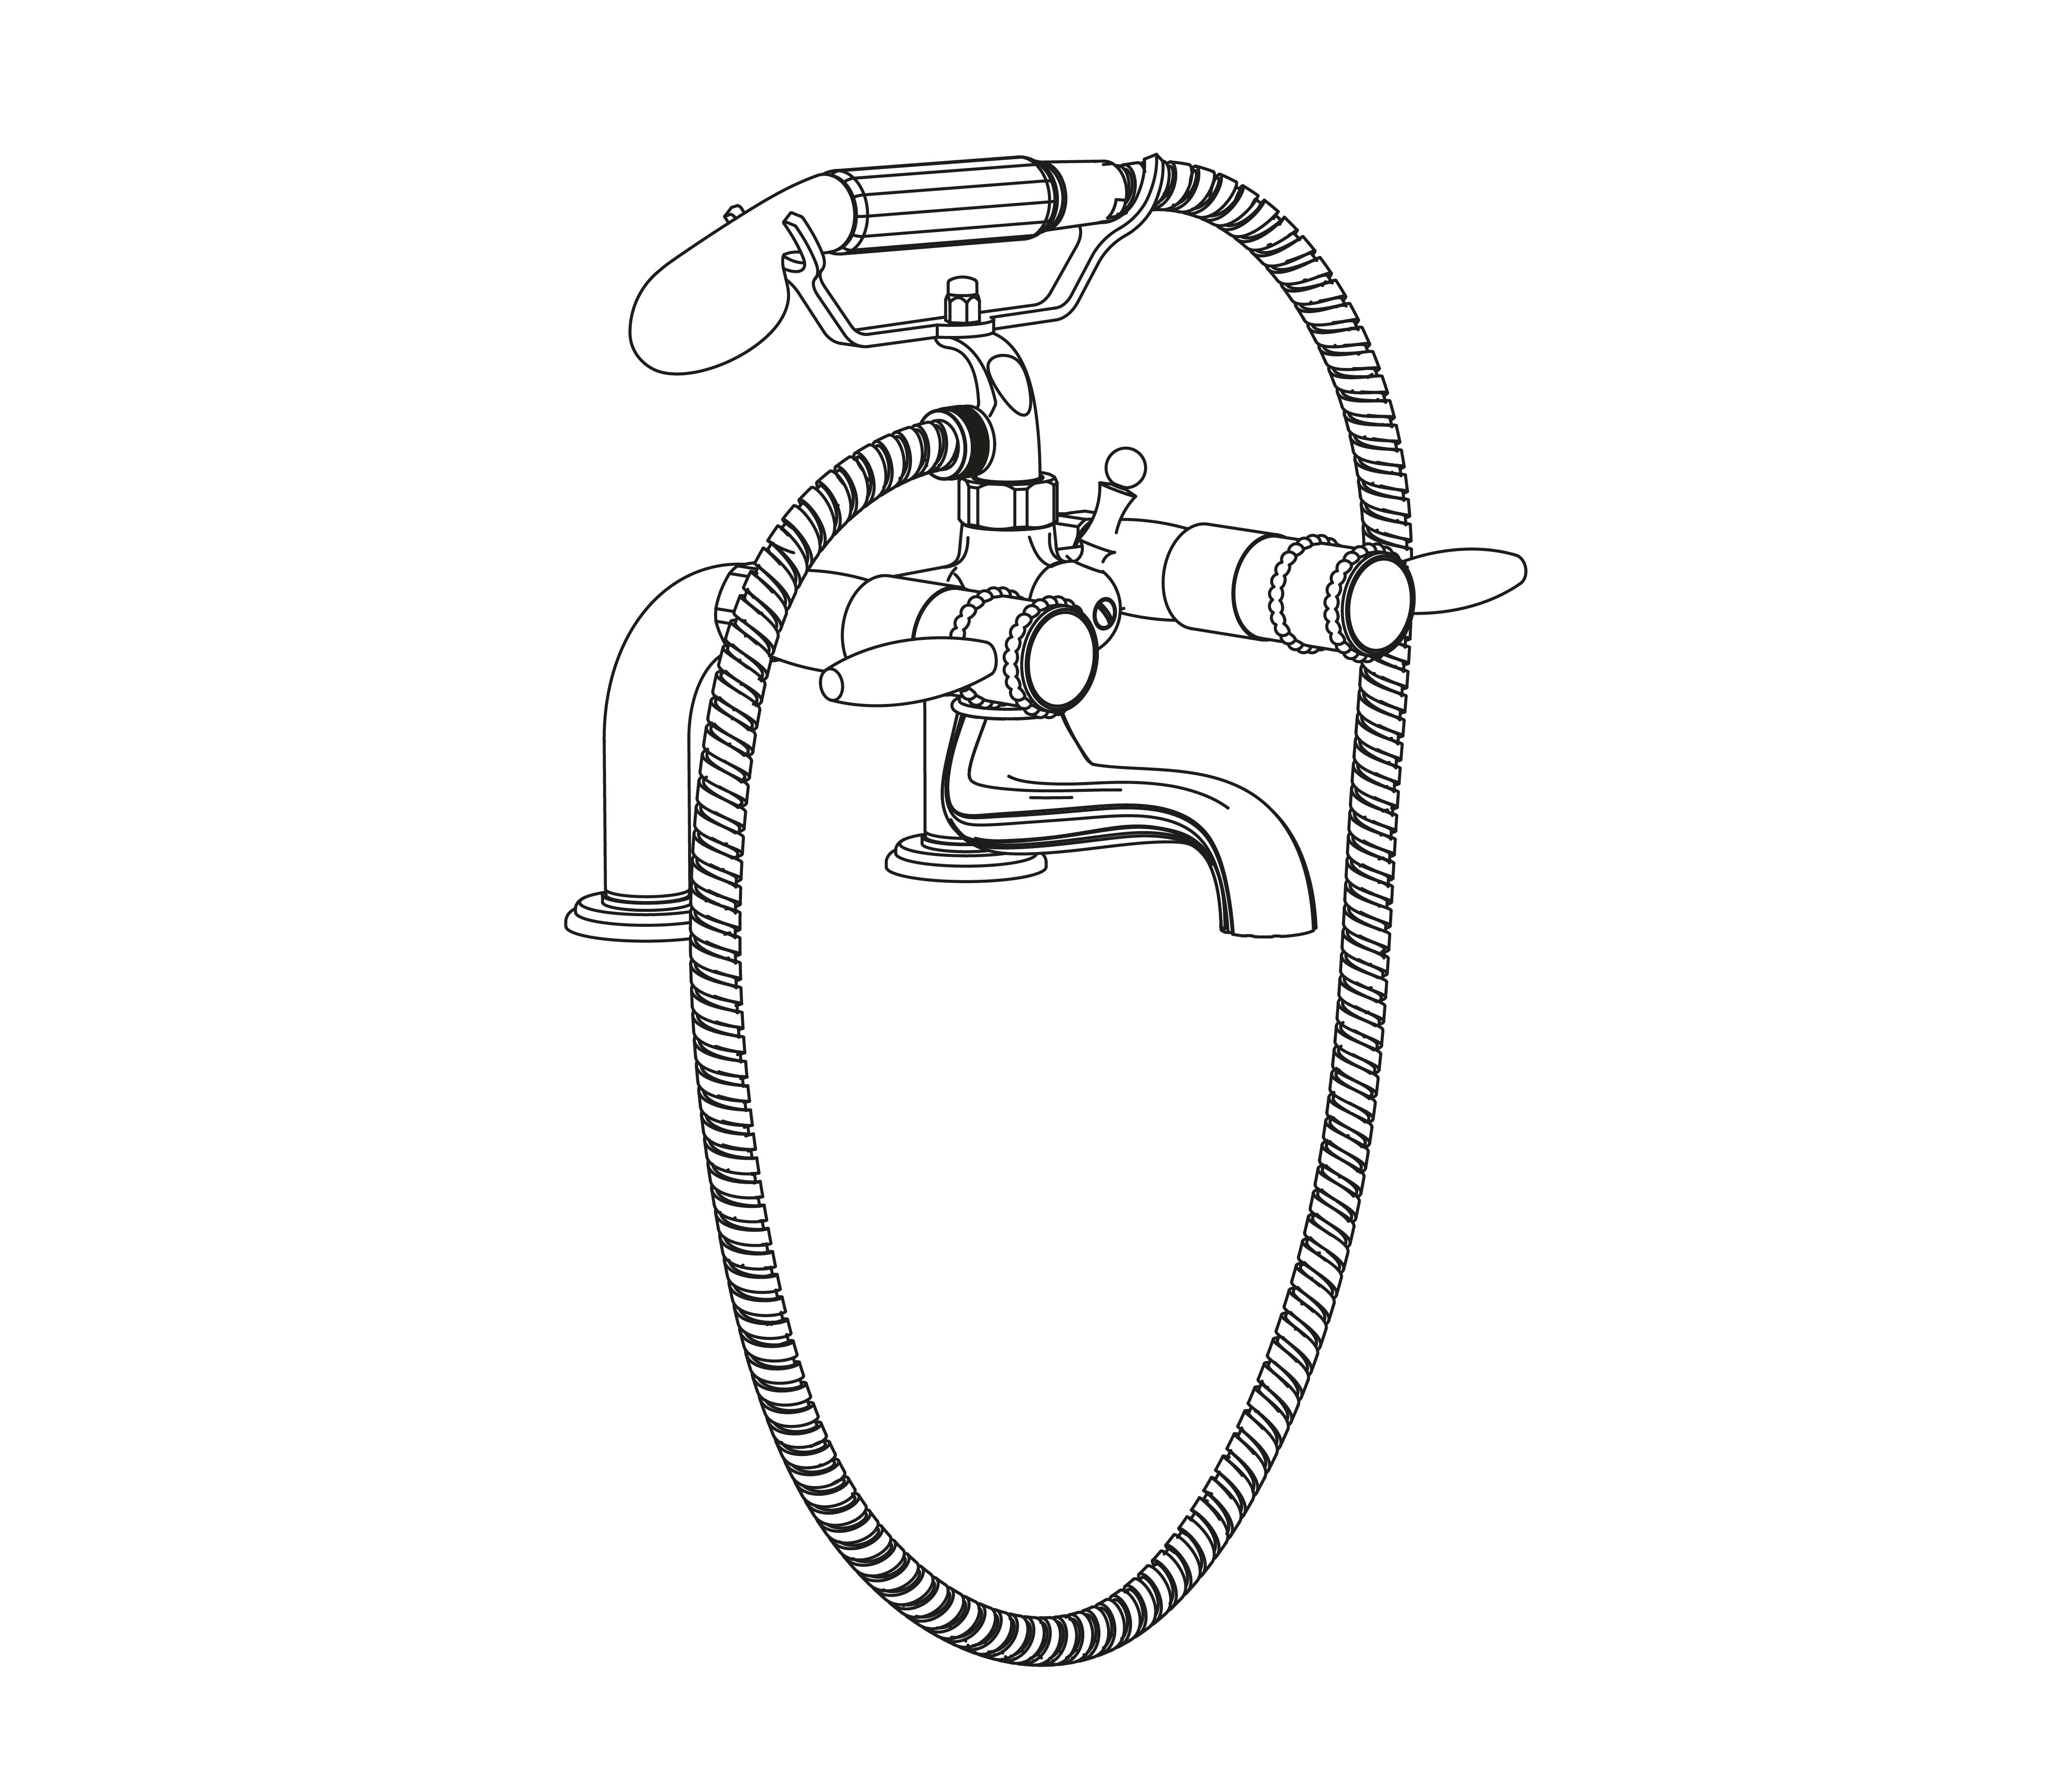 C66-3306 Rim mounted bath and shower mixer